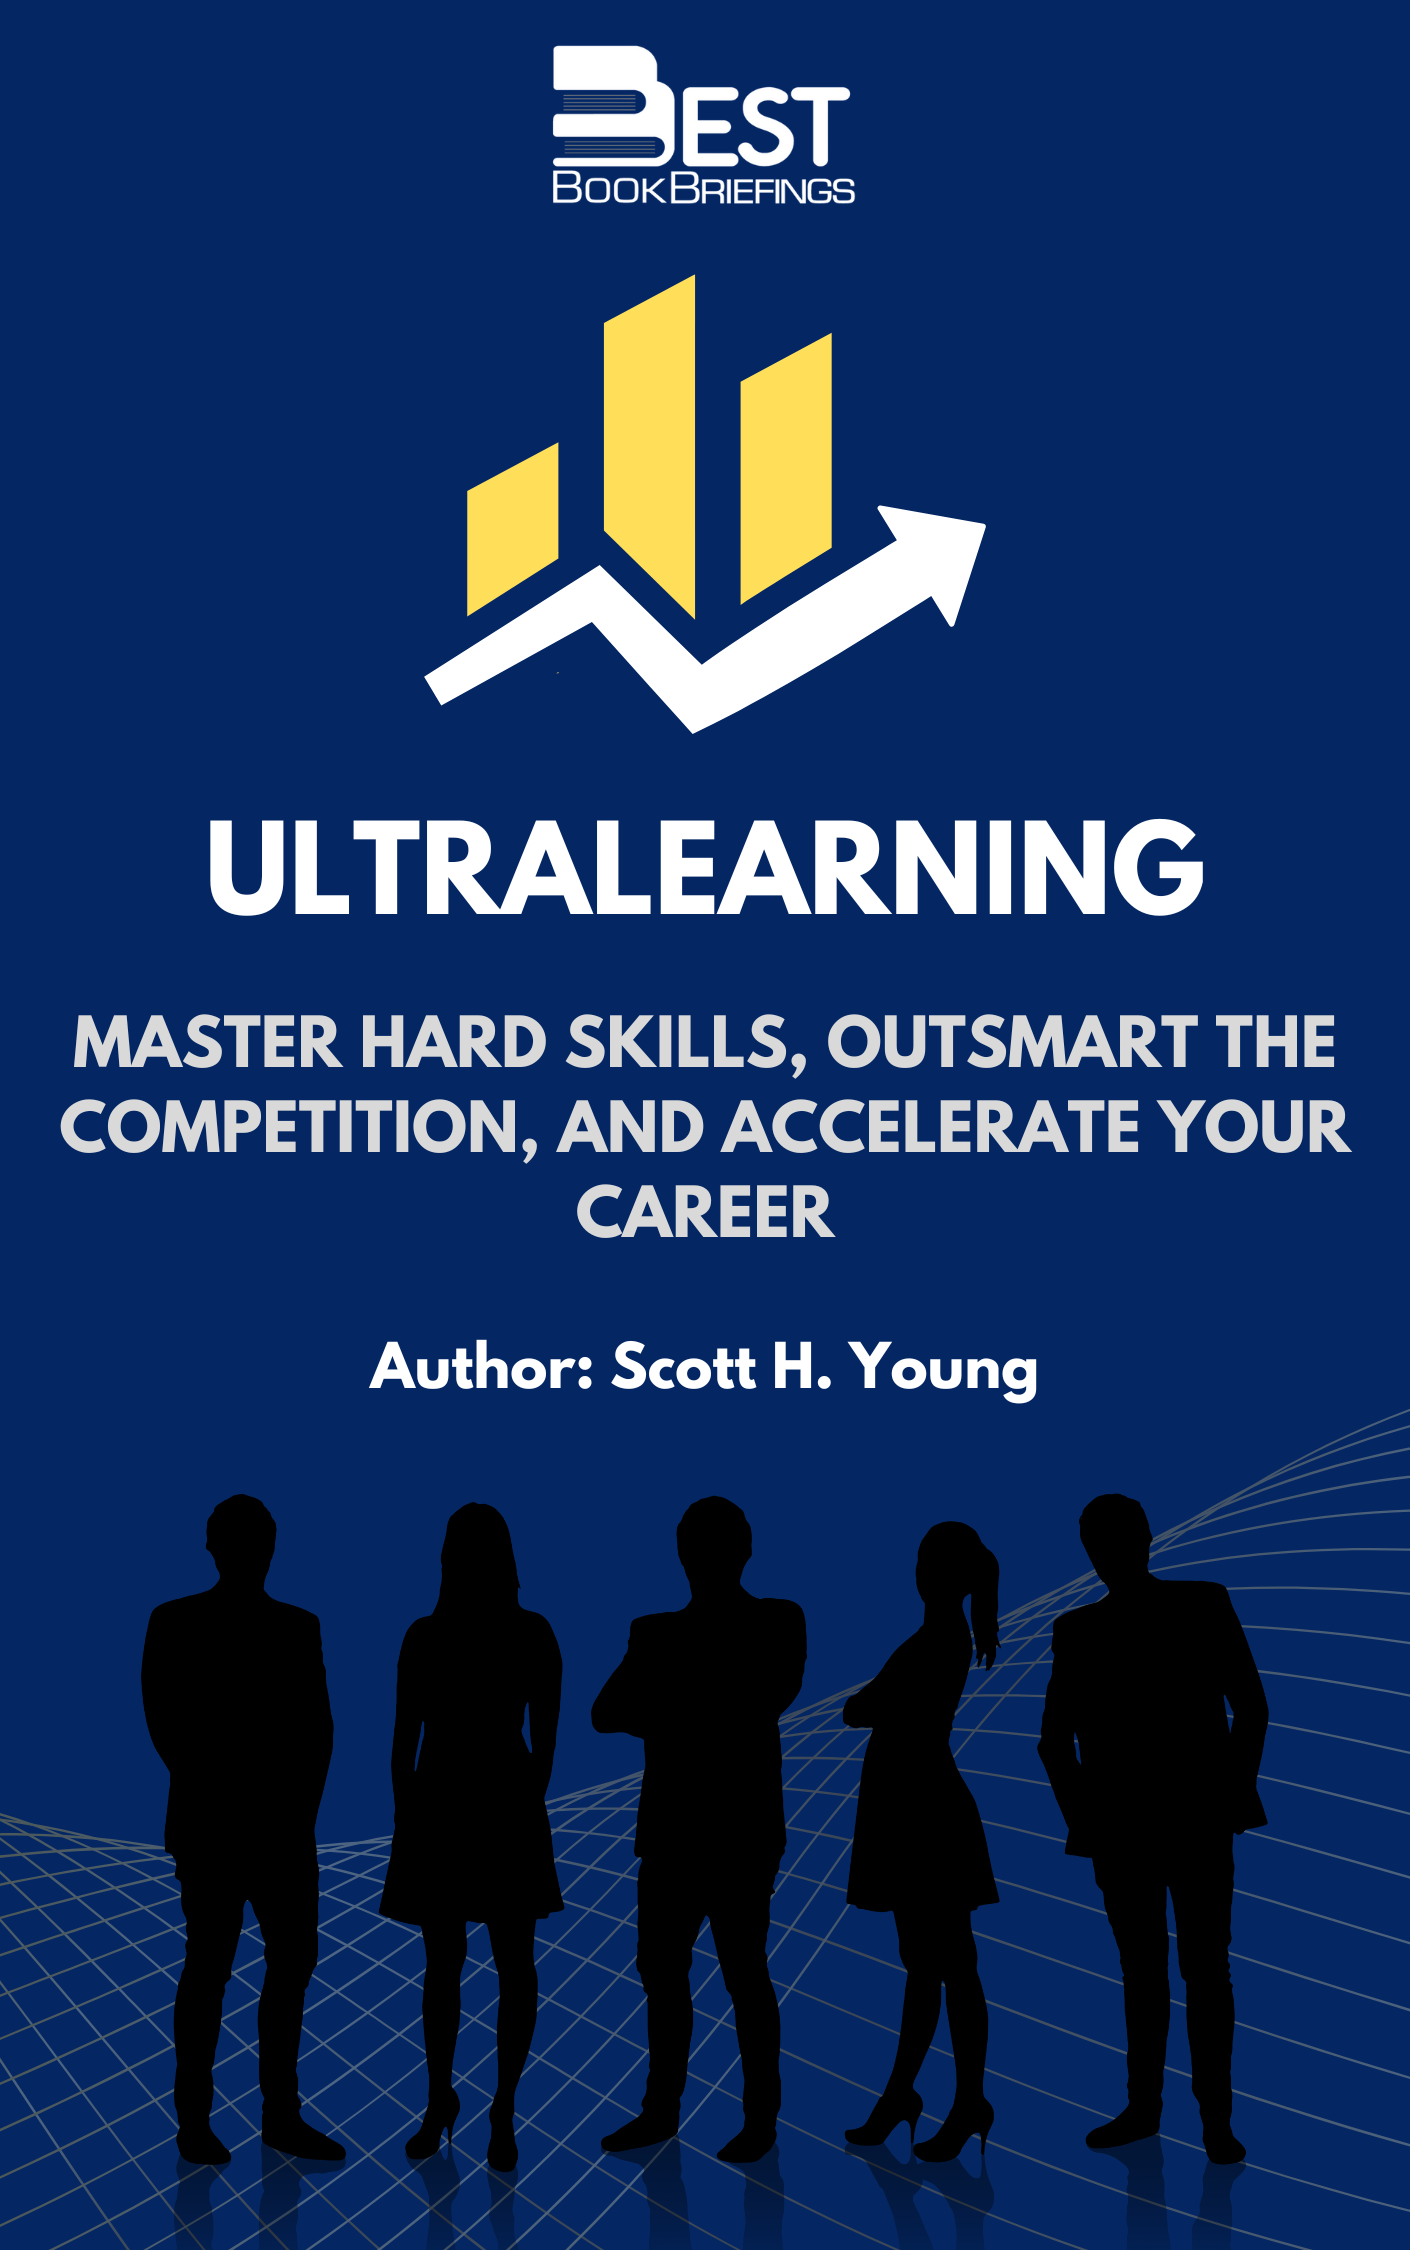 When we hear the word ‘learning’, we think that there is something that has to do with education. Scott Young, in his book Ultralearning, discovered more about what the word ‘learning’ has from significance. He went deeper and reached insightful perspectives through which we’ll love to learn more, produce more, and 